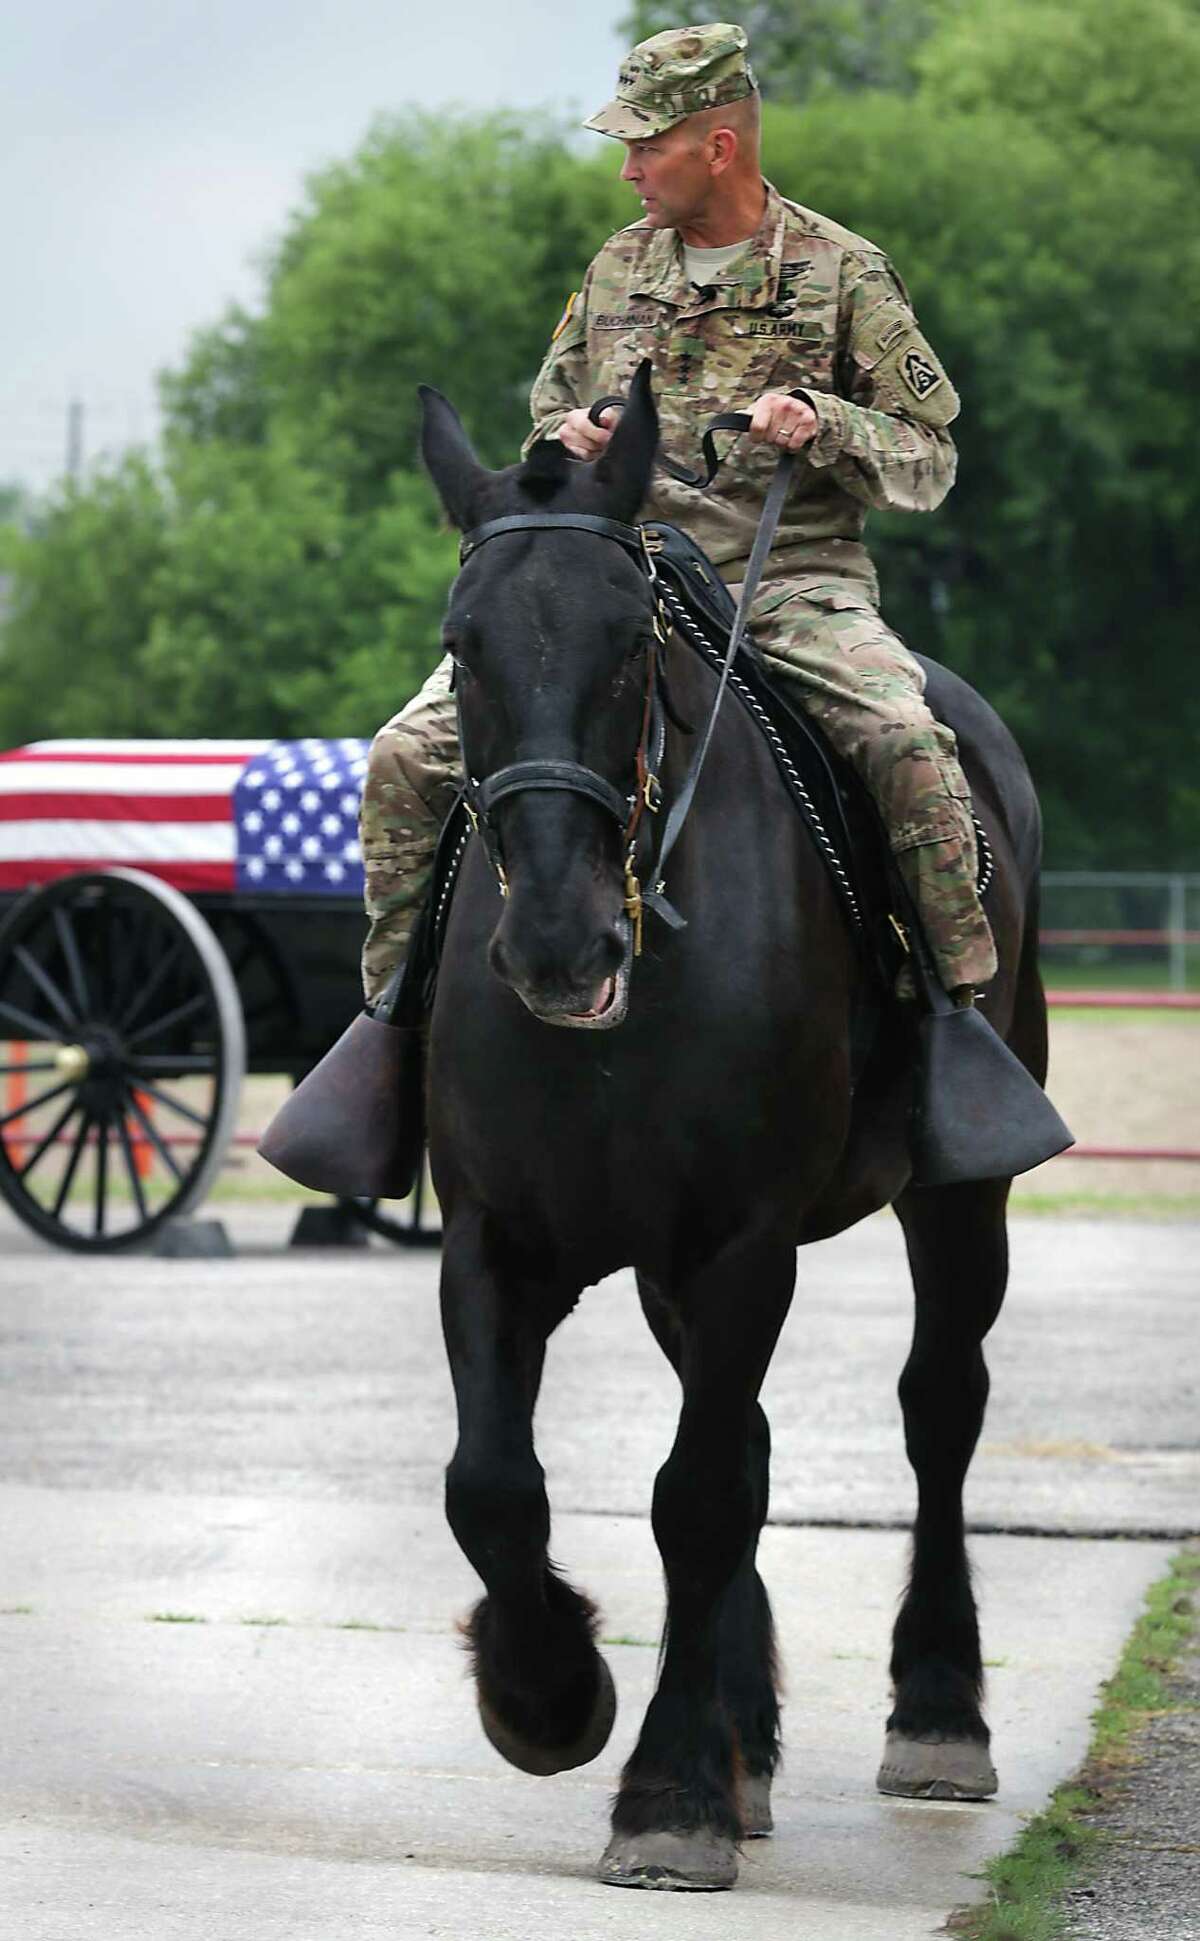 Lt. Gen. Jeffrey Buchanan, commander of U.S. Army North, rides Preston, a horse with the Caisson Section of Joint Base San Antonio- Fort Sam Houston. Buchanan will be the first general on horseback in the Battle of Flowers Parade since Gen. John Pershing in 1917, a festival spokesman said.